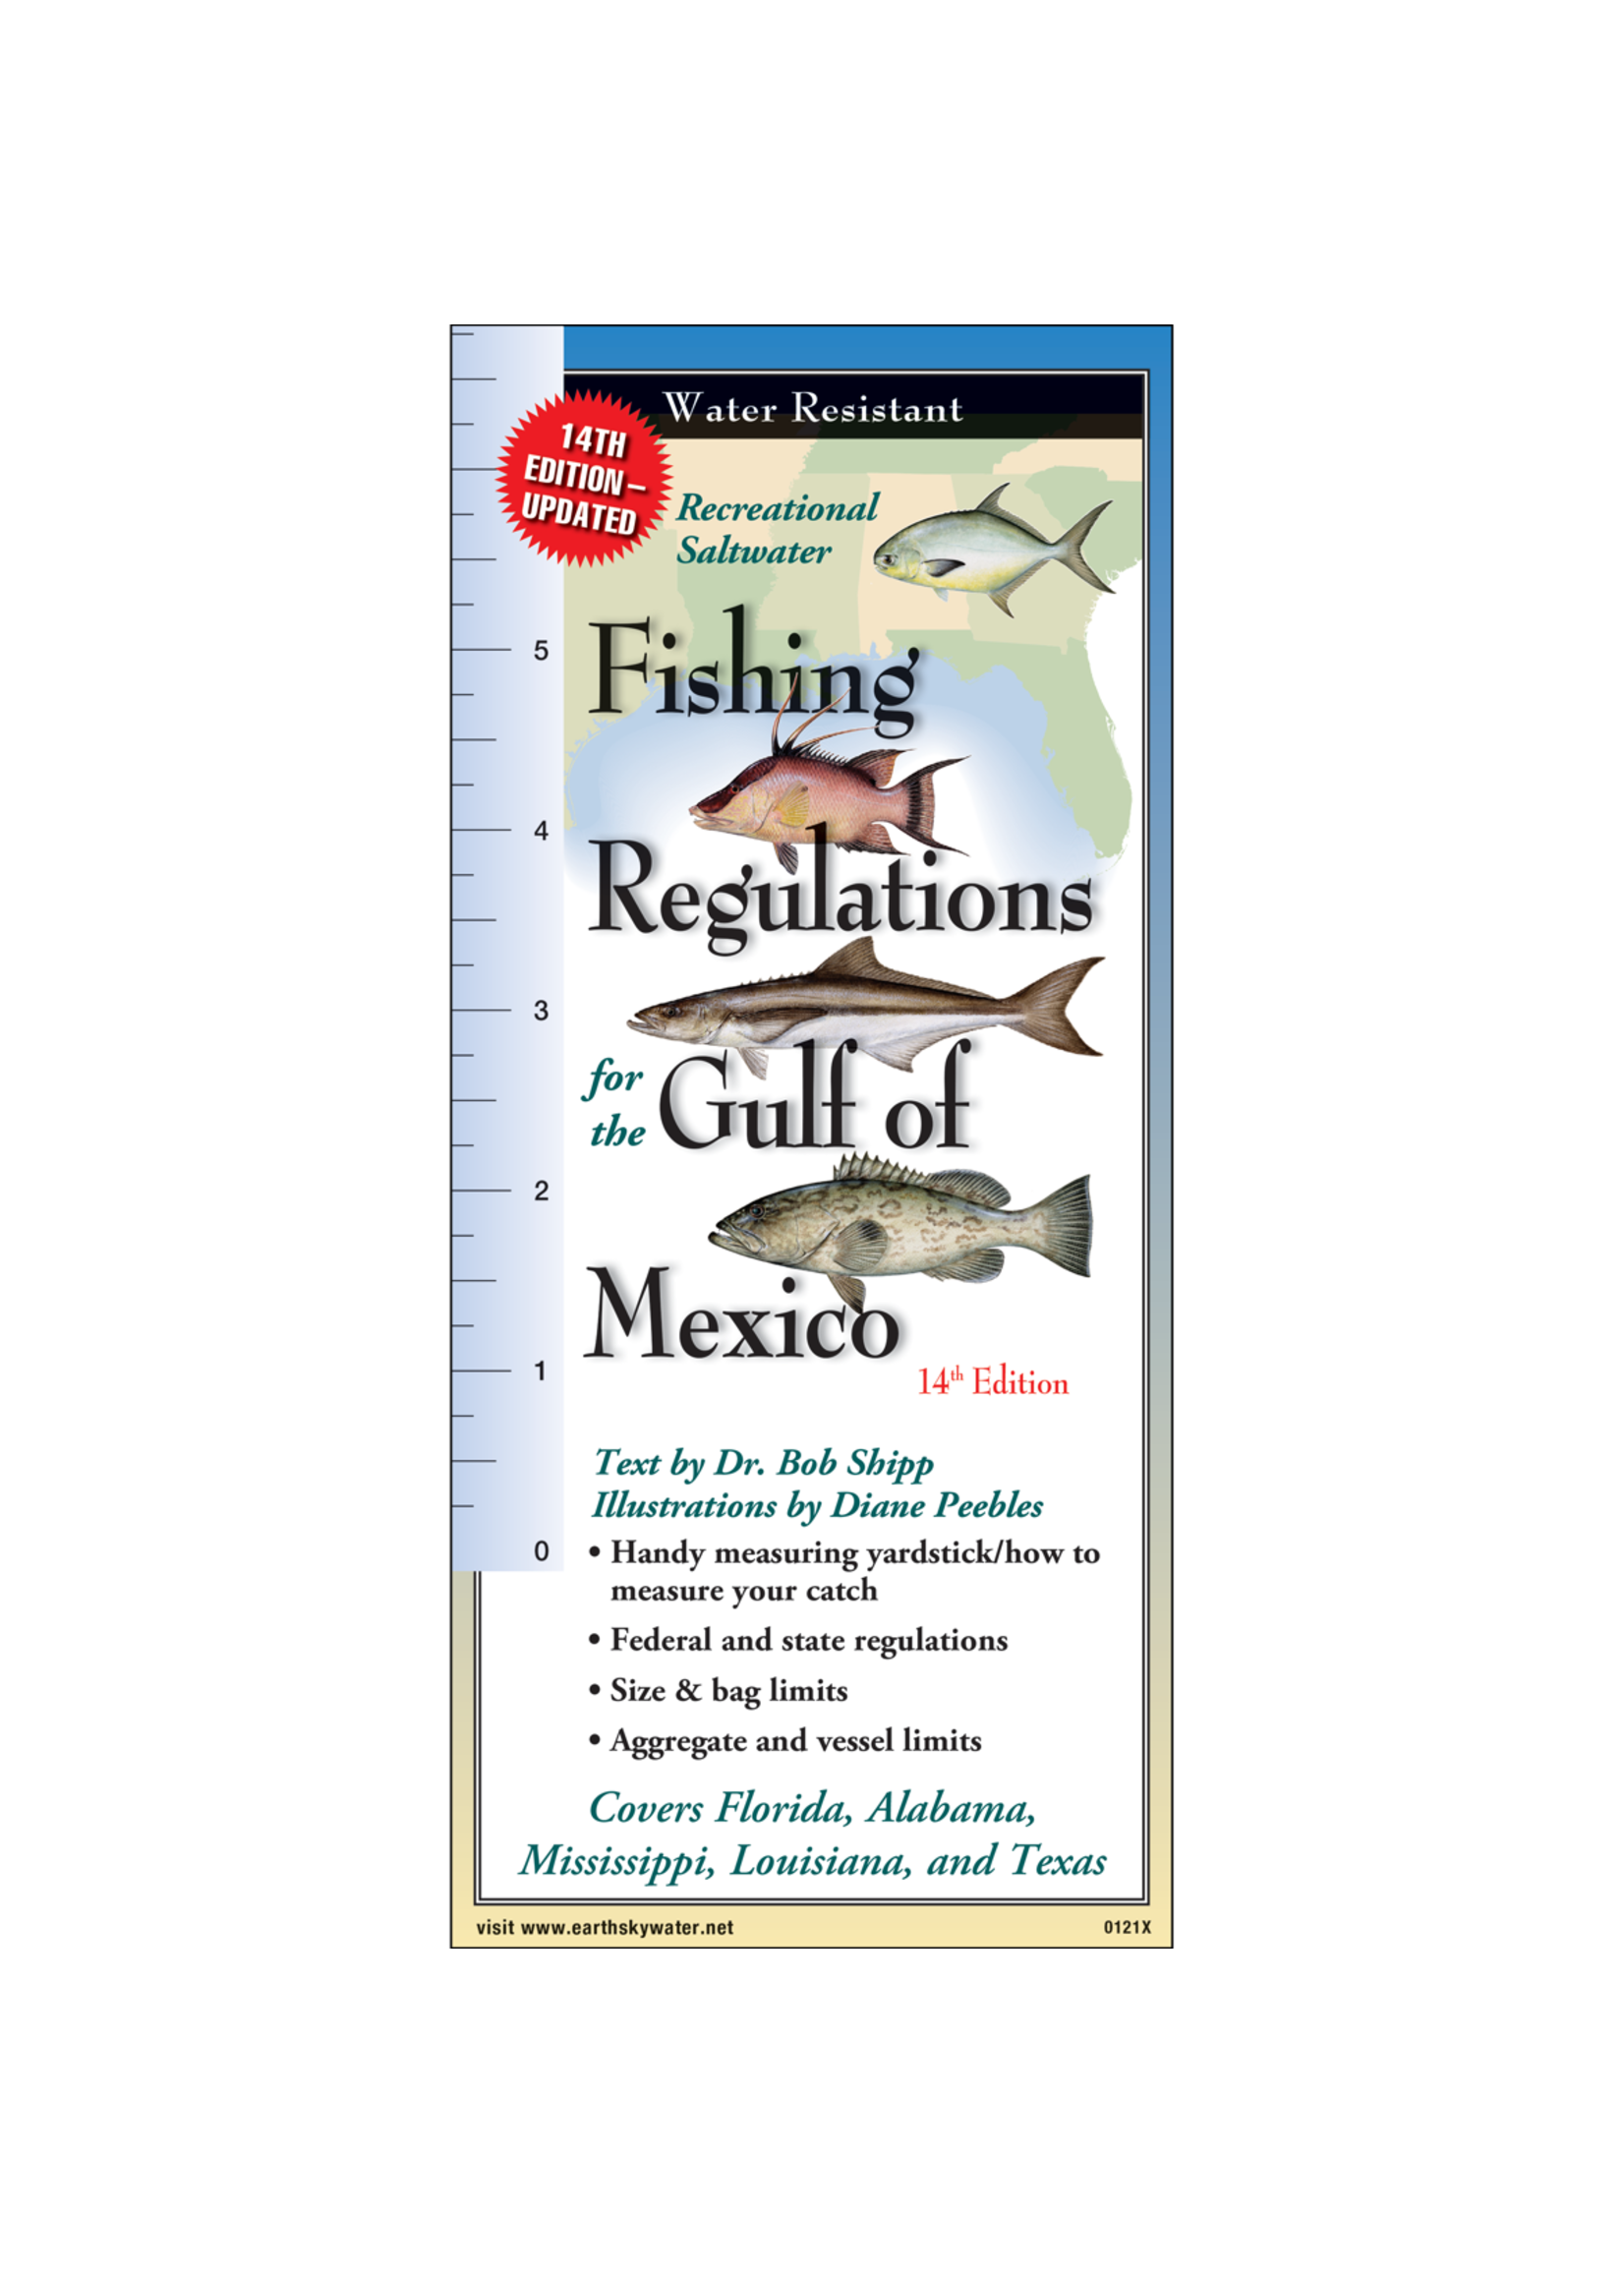 Earth Sky + Water Fishing Regulations, Gulf of Mexico